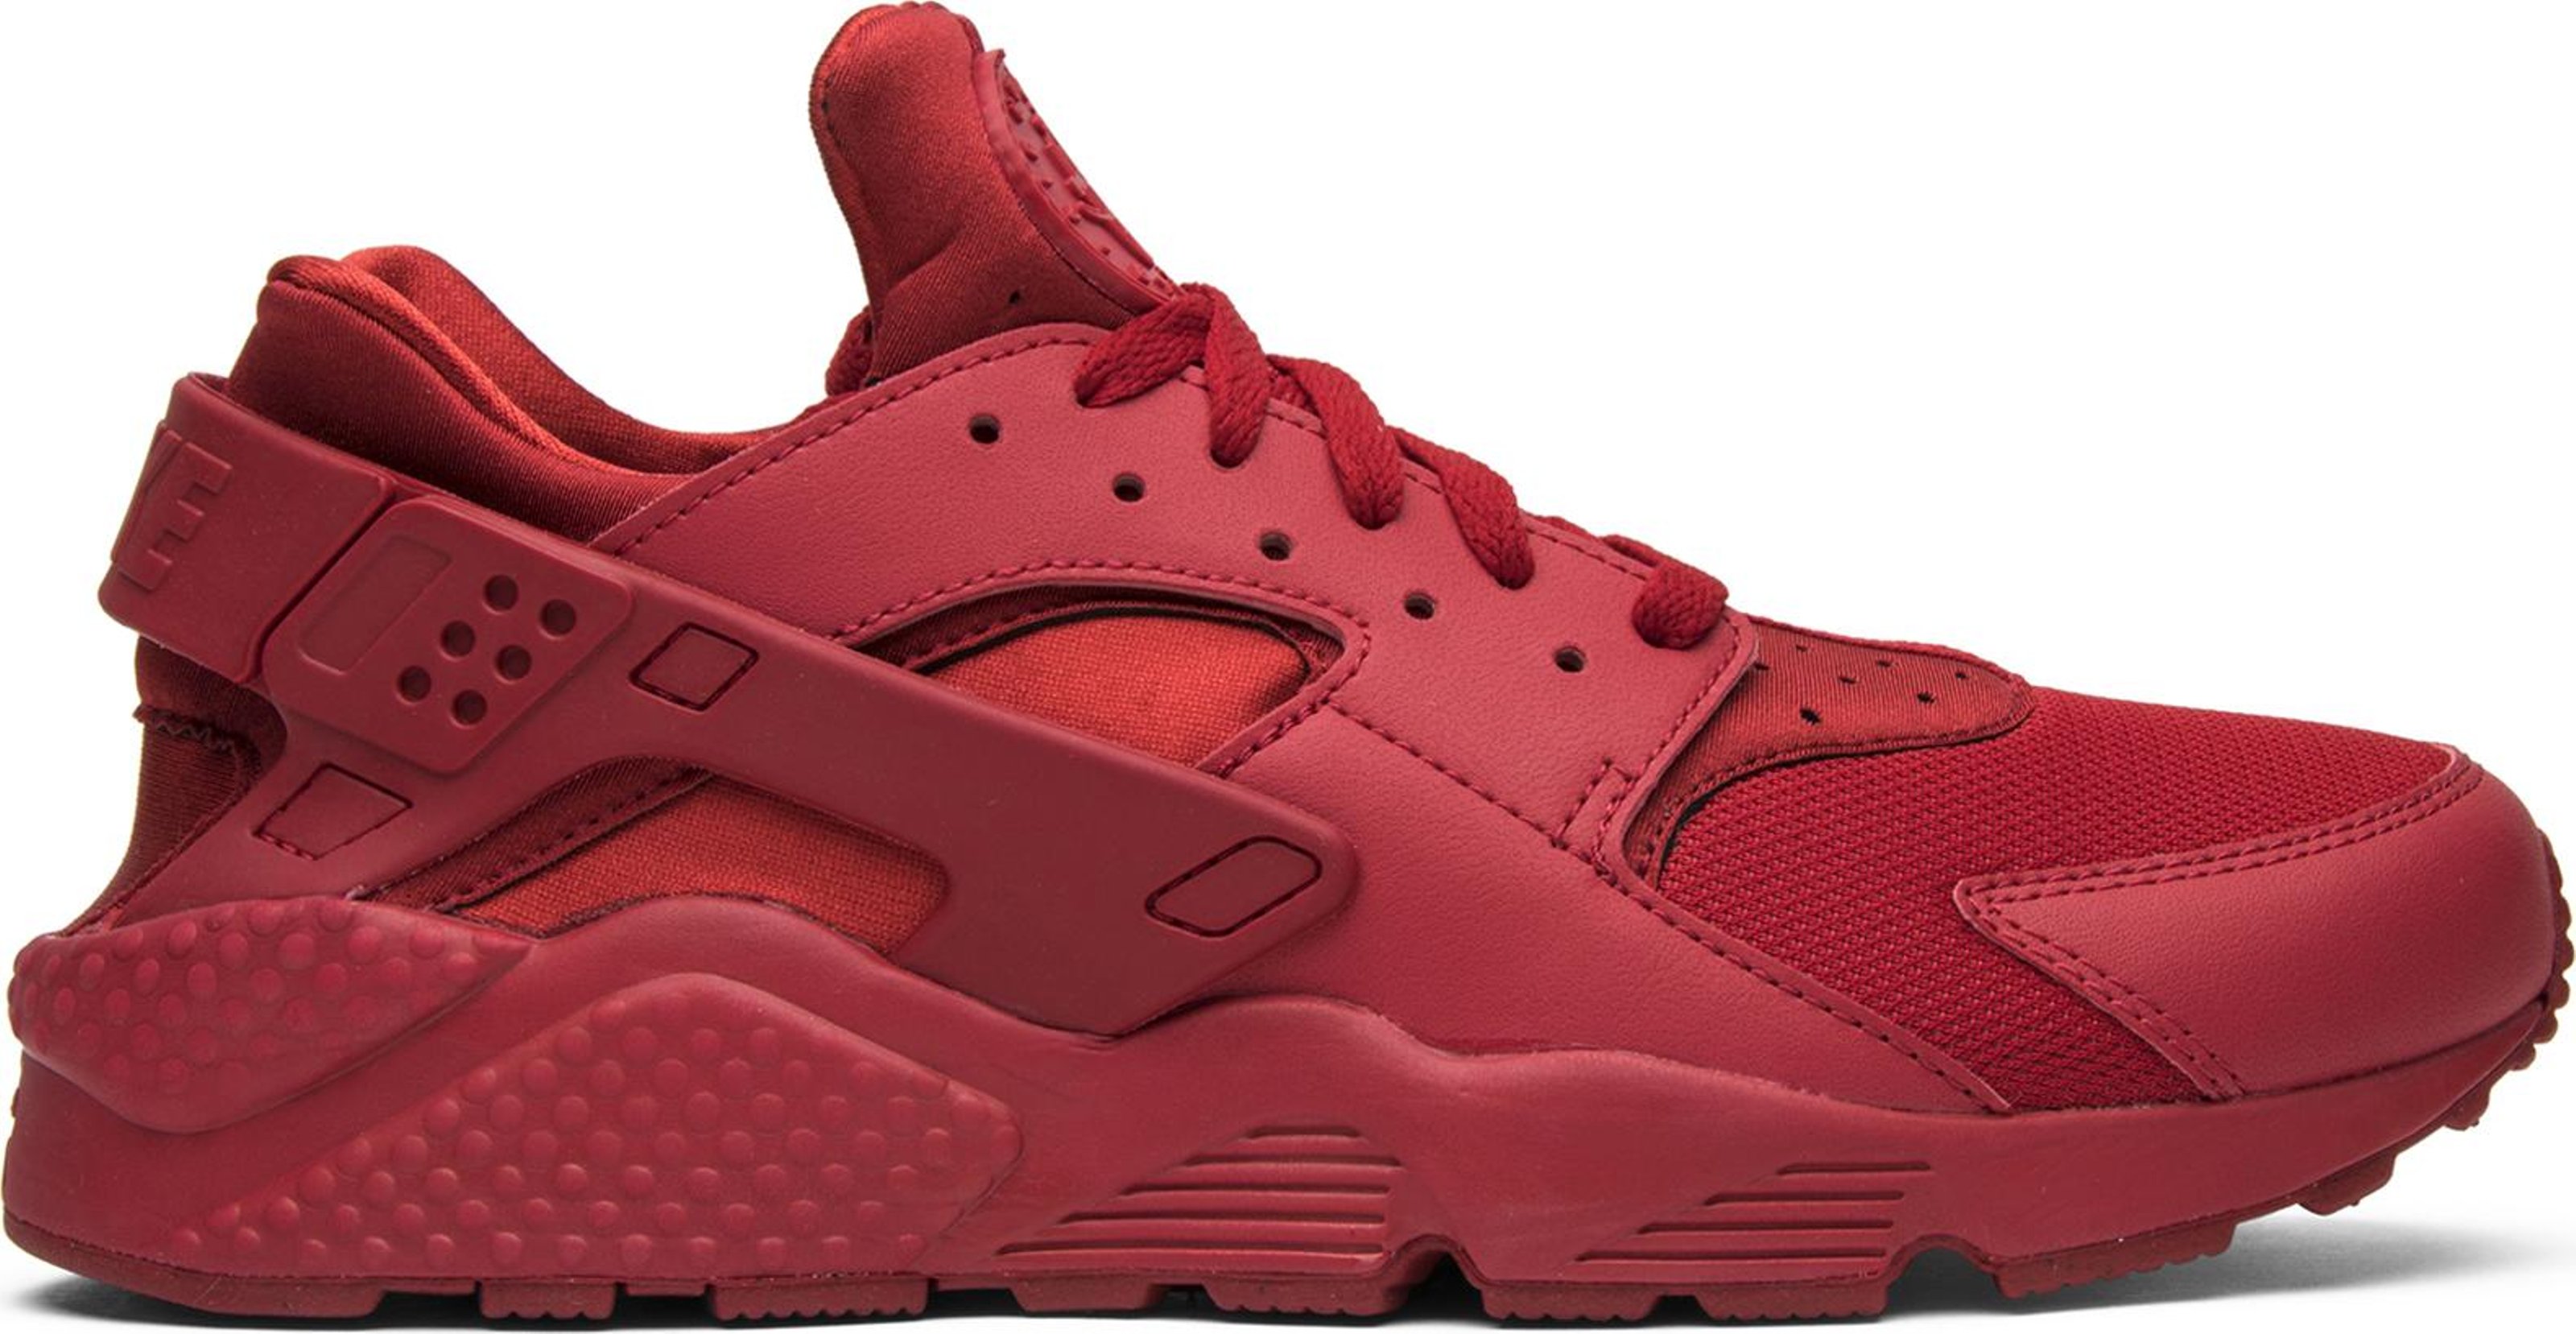 Buy Air Huarache 'Triple Red' - 318429 660 - Red | GOAT